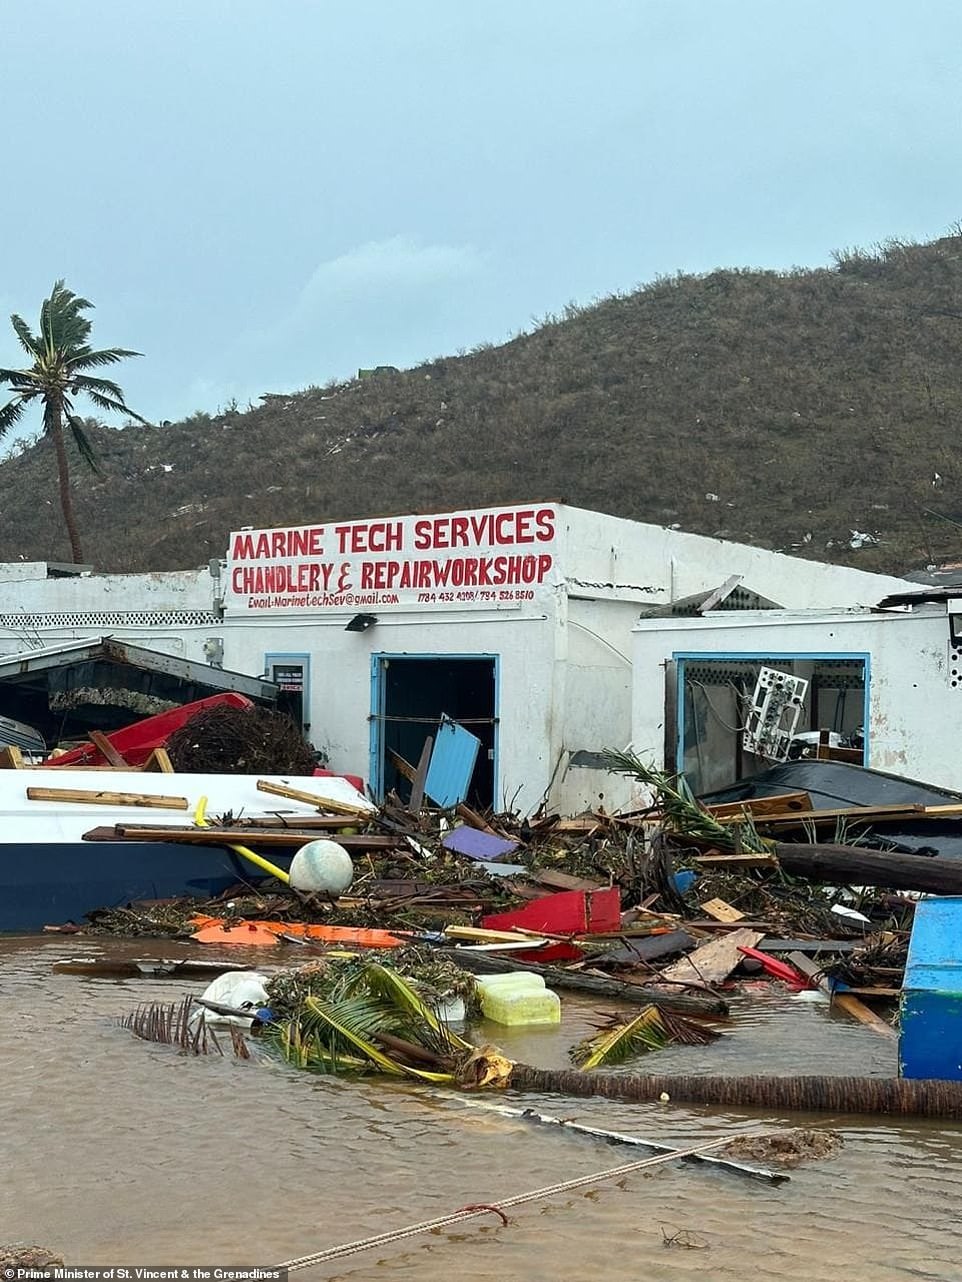 Grenadian resident Roy O'Neale, 77, recalled how he lost his home to Ivan and built back stronger, with his current home sustaining minimal damage from Hurricane Beryl. 'I felt the wind whistling, and then for about two hours straight, it was really, really terrifying at times,' he said. 'Branches of trees were flying all over the place.' In Barbados, prime minster Mia Mottley said at least 20 fishing boats had been sunk after the island was battered by high winds. 'Right now, I´m real heartbroken,' said Vichelle Clark King as she surveyed her damaged shop in the capital of Bridgetown that was filled with sand and water.